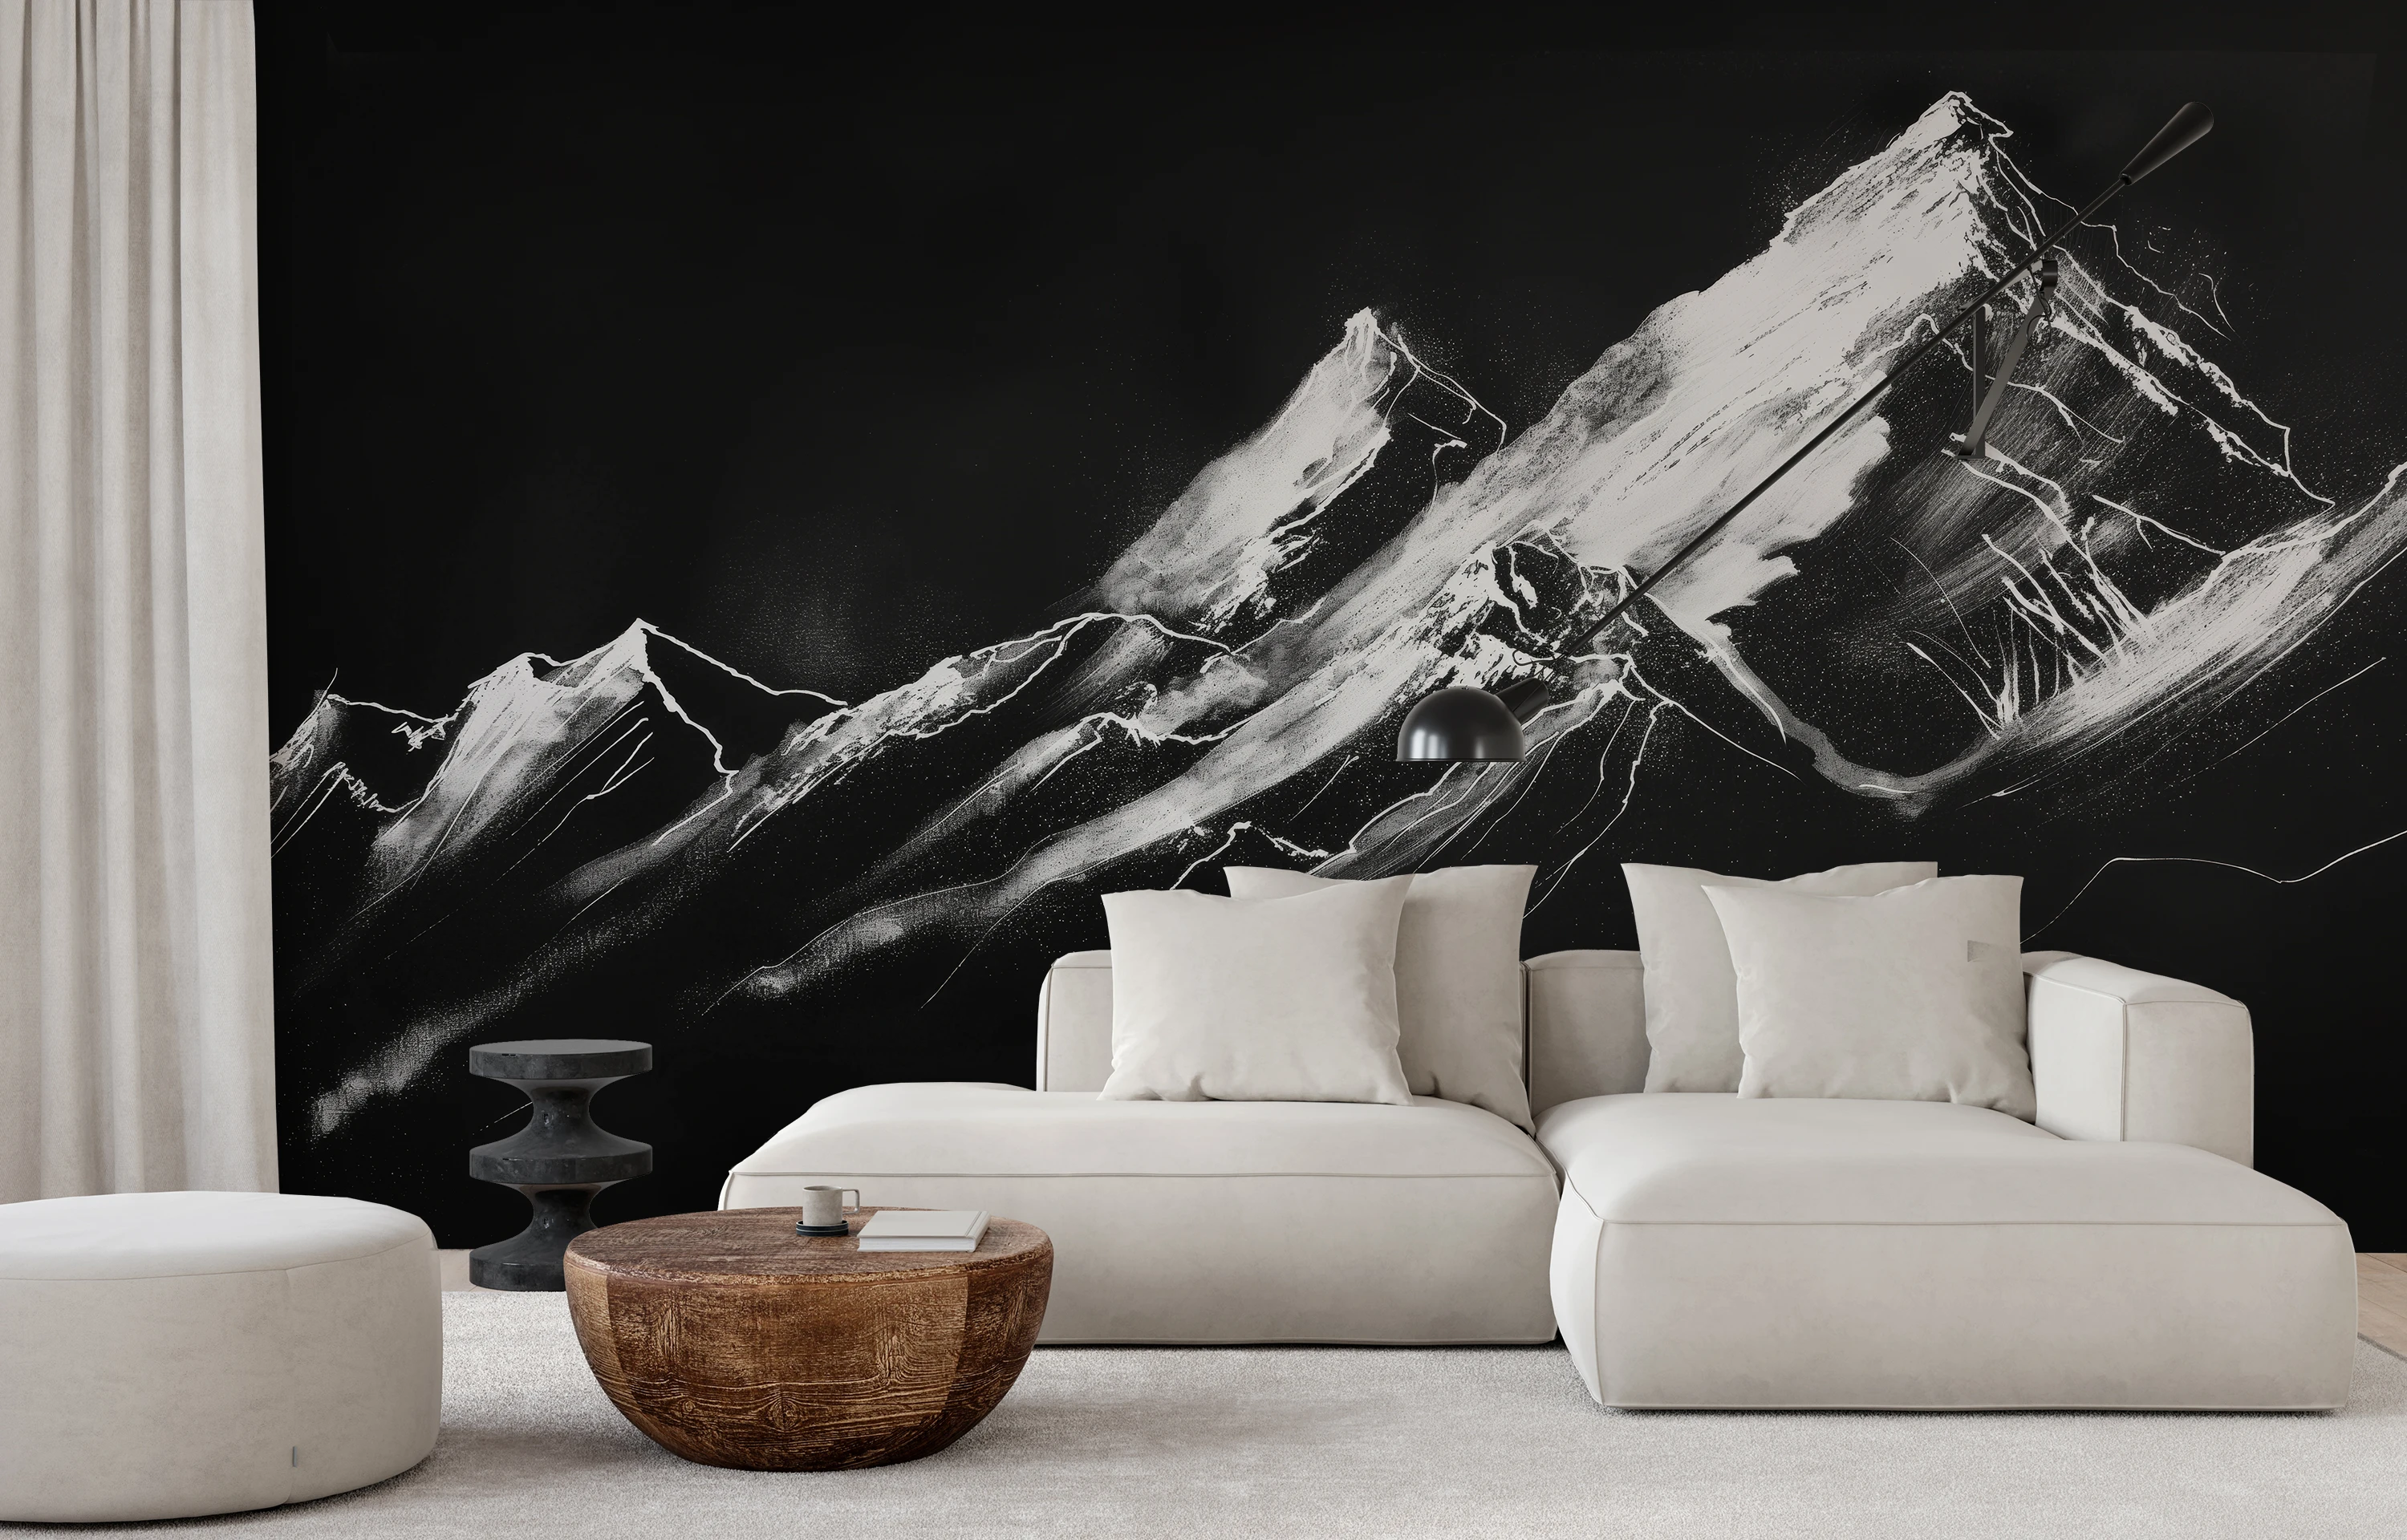 A black and white photo wallpaper with a dynamic portrait of mountains, whose play of light and shadow adds a modern, monochromatic look to the space.